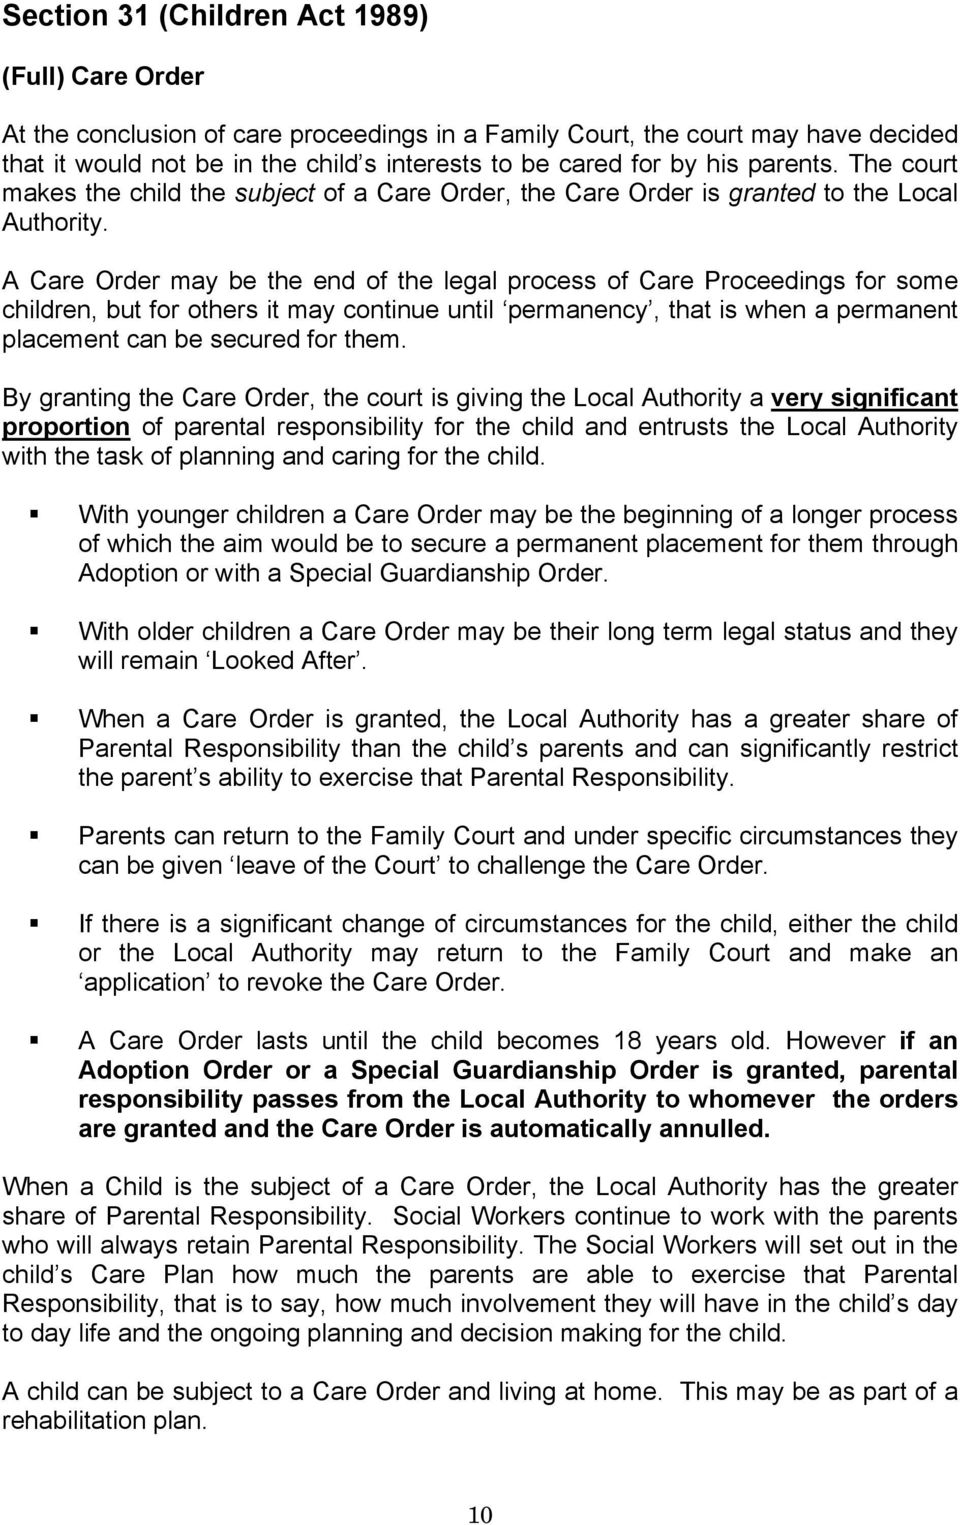 A Care Order may be the end of the legal process of Care Proceedings for some children, but for others it may continue until permanency, that is when a permanent placement can be secured for them.